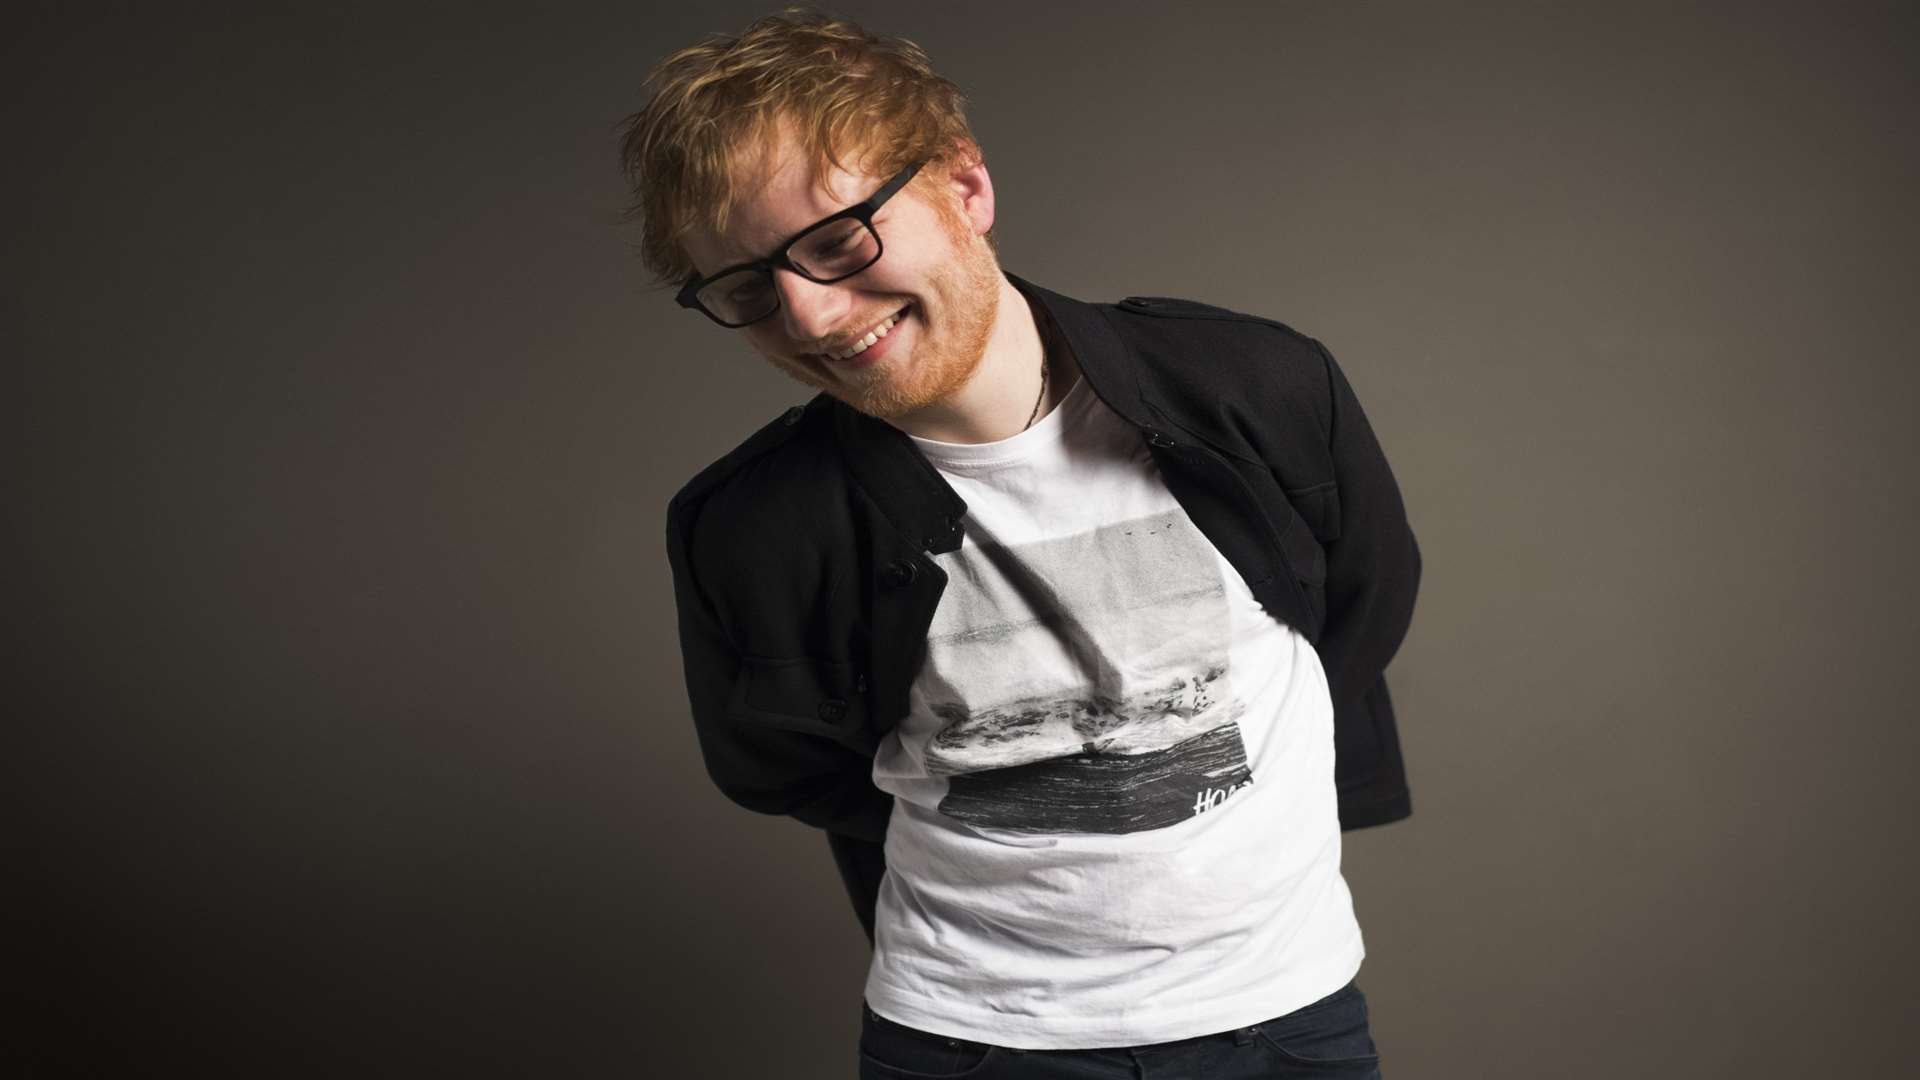 Ed's last album notched up an unbelievable 10 Top Ten singles including Shape of You and Castle on the Hill